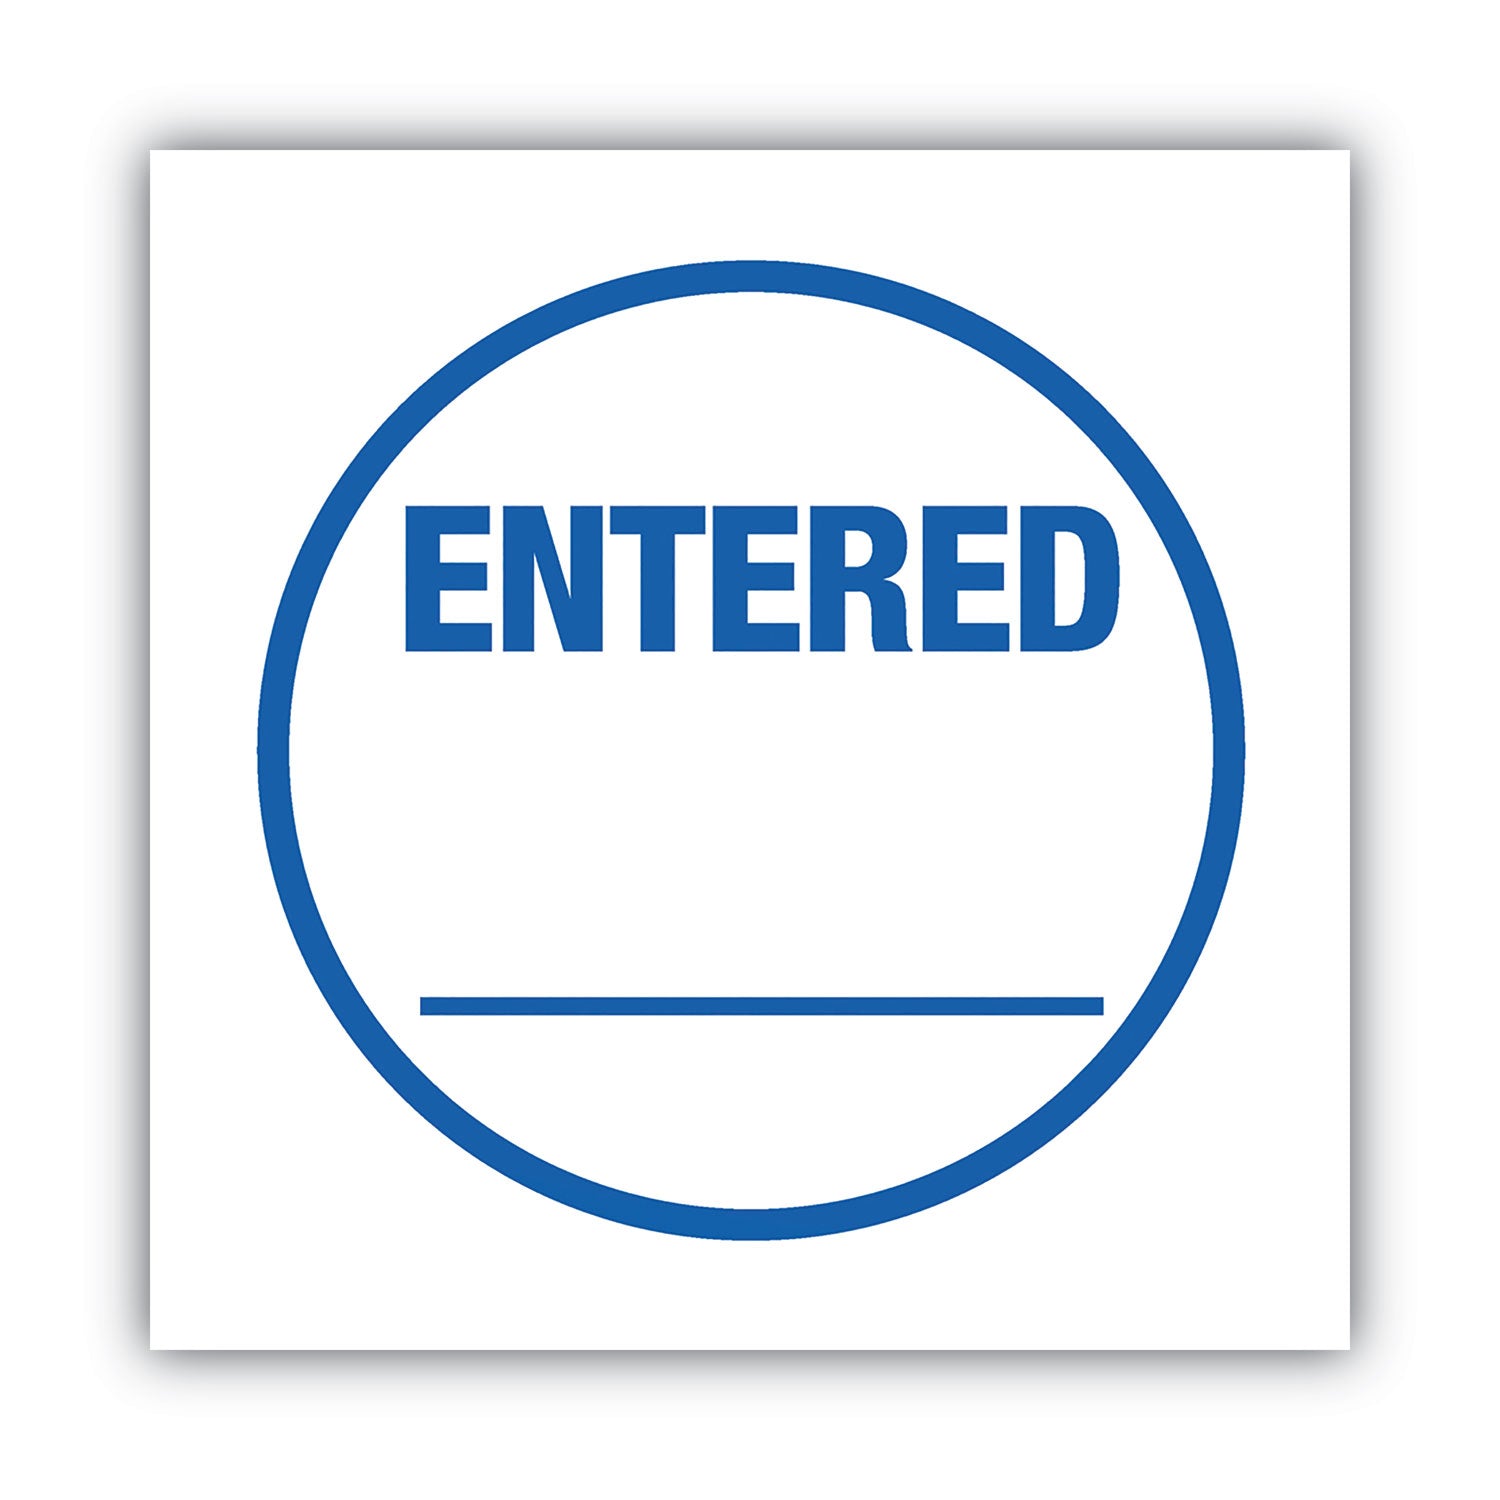 Pre-Inked Round Stamp, ENTERED, 0.63" dia, Blue - 